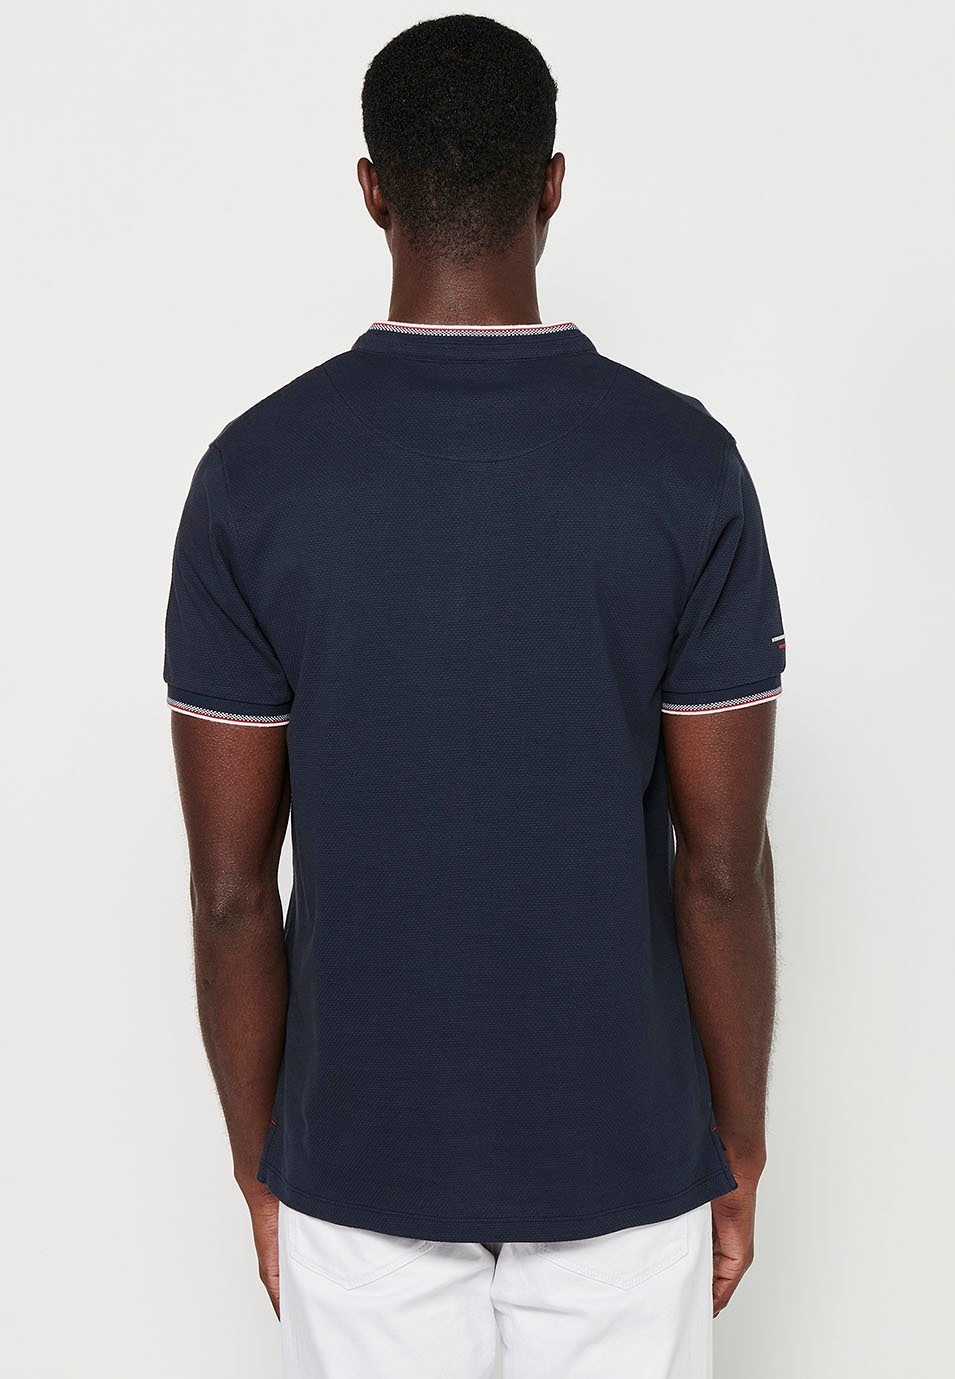 Short-sleeved cotton polo shirt with ribbed finish with round neck, buttoned opening and textured side slits in Navy Color for Men 7